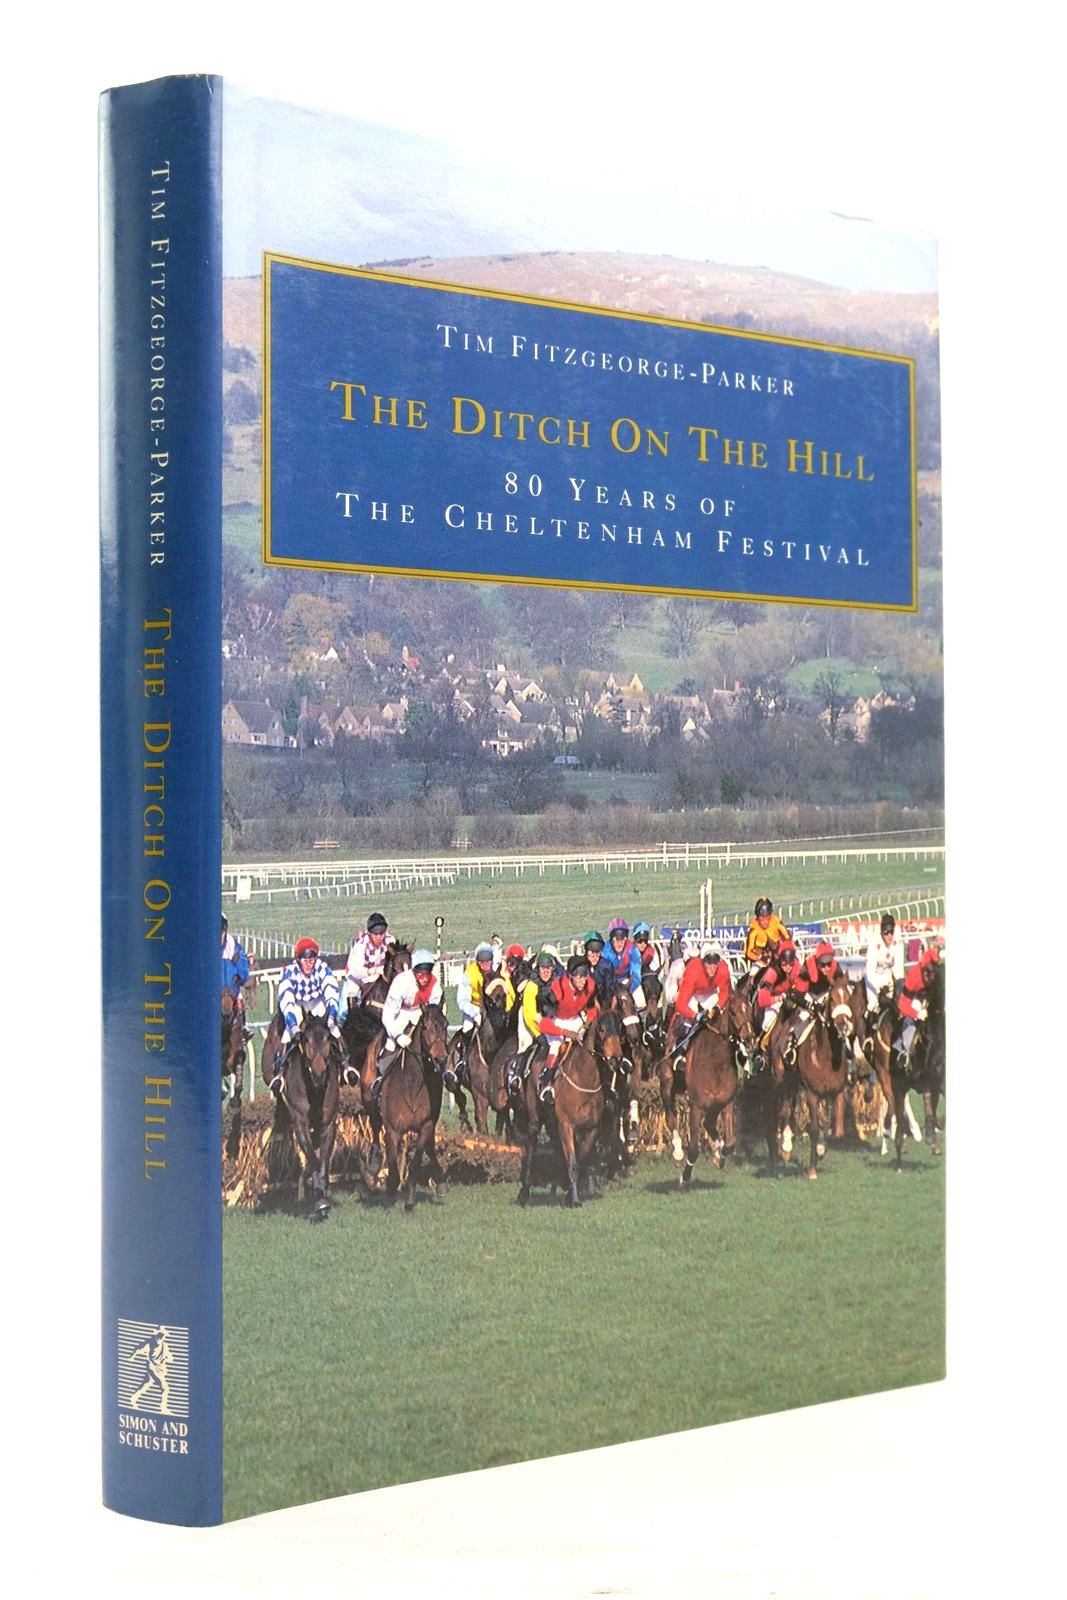 Photo of THE DITCH ON THE HILL: 80 YEARS OF THE CHELTENHAM FESTIVAL written by Fitzgeorge-Parker, Tim published by Simon &amp; Schuster Ltd. (STOCK CODE: 2137960)  for sale by Stella & Rose's Books